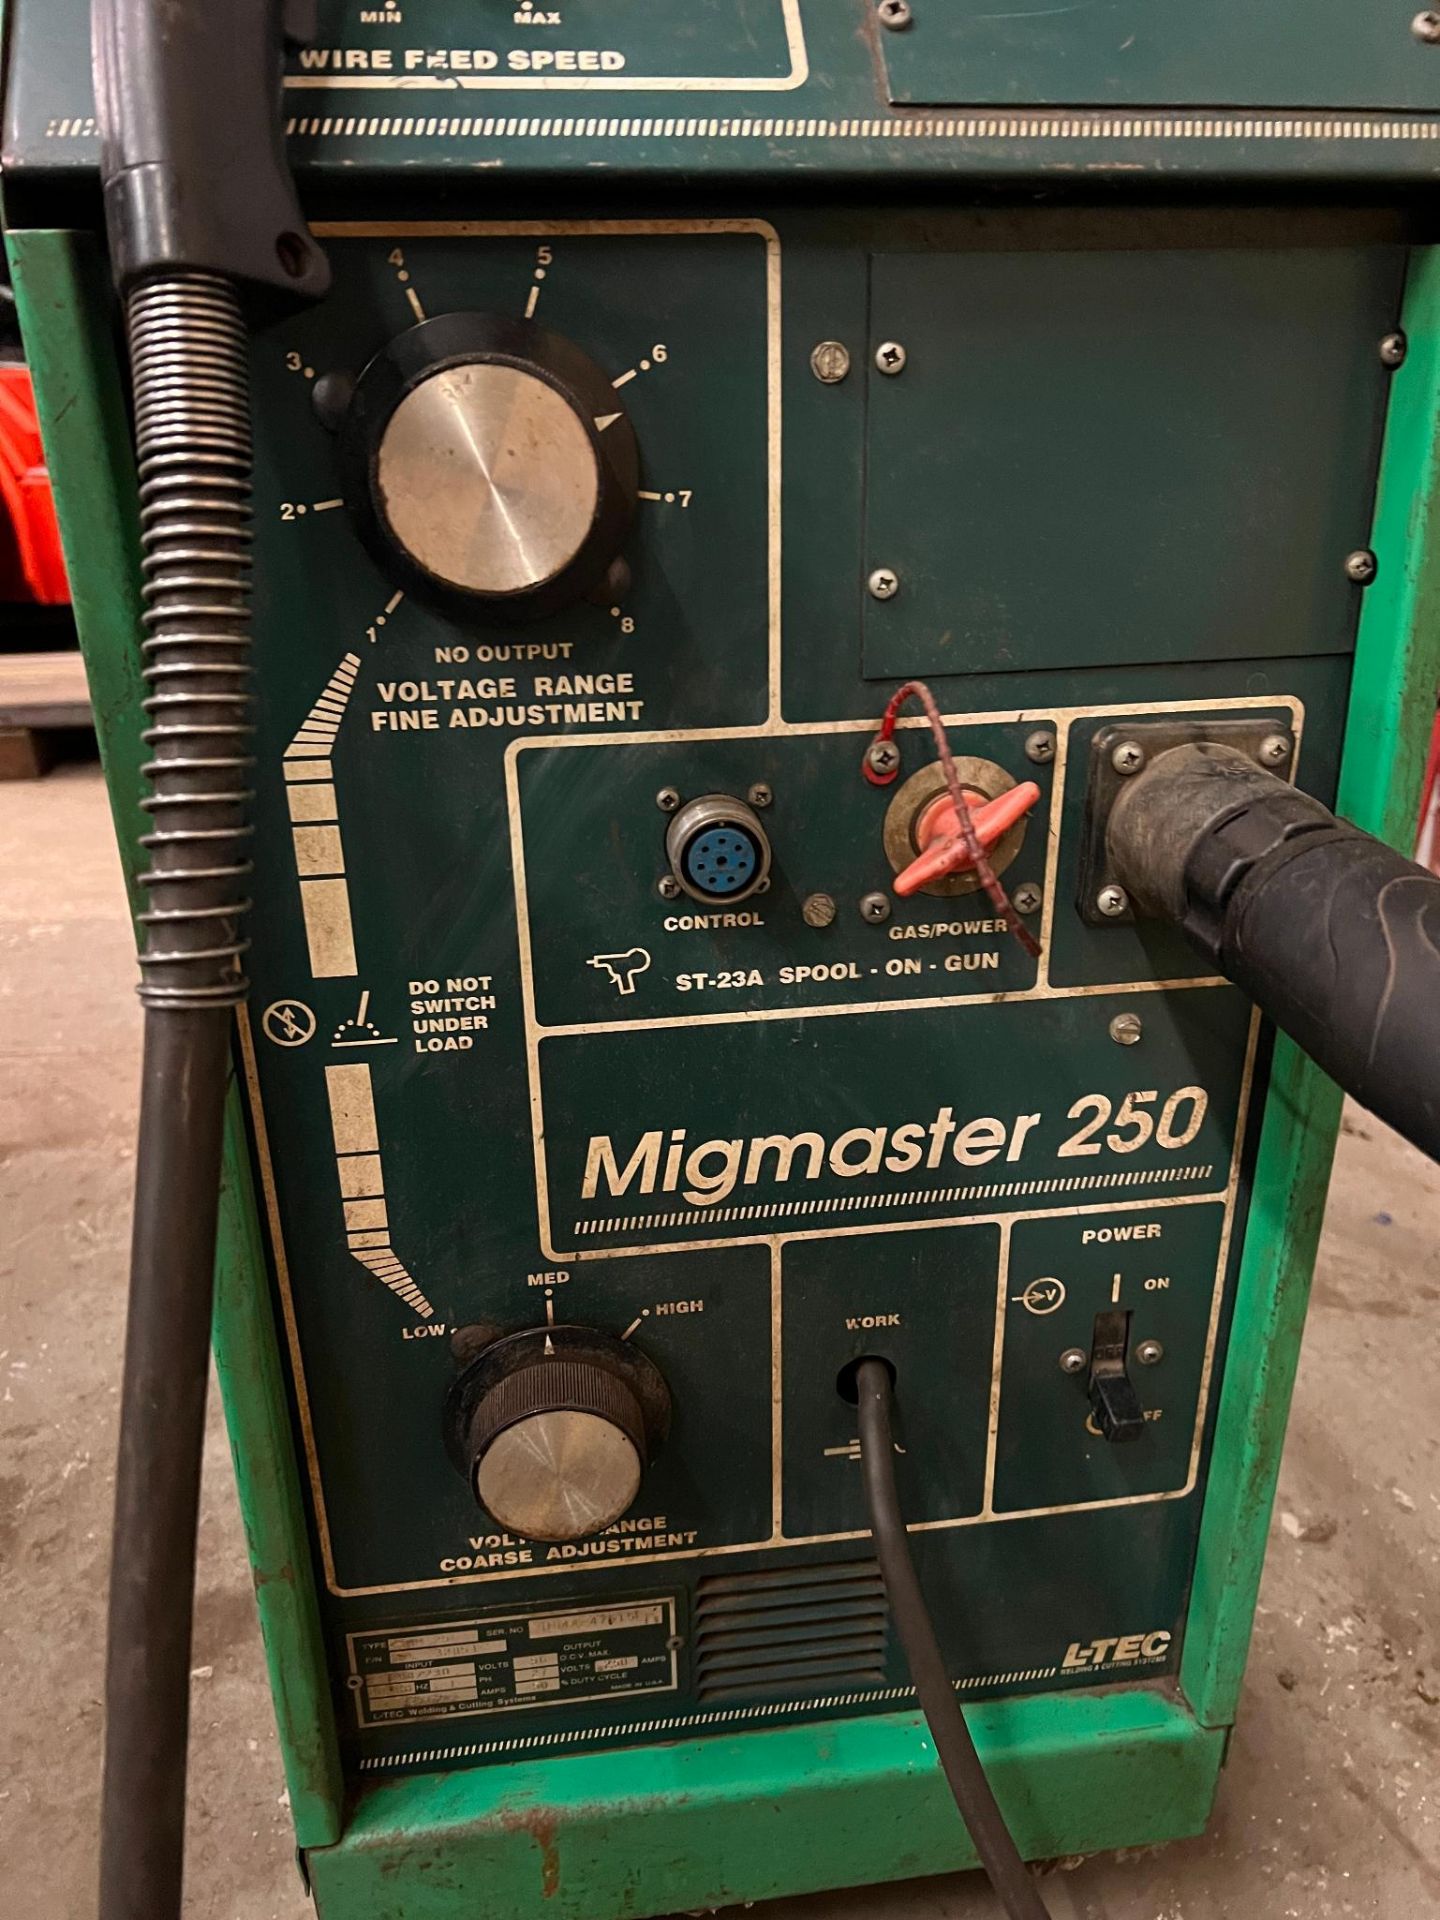 L-Tec Migmaster 250 Single Phase Wire Feed Welder, Serial Number B94A-47515. Type: MM-256 Part # 328 - Image 4 of 13